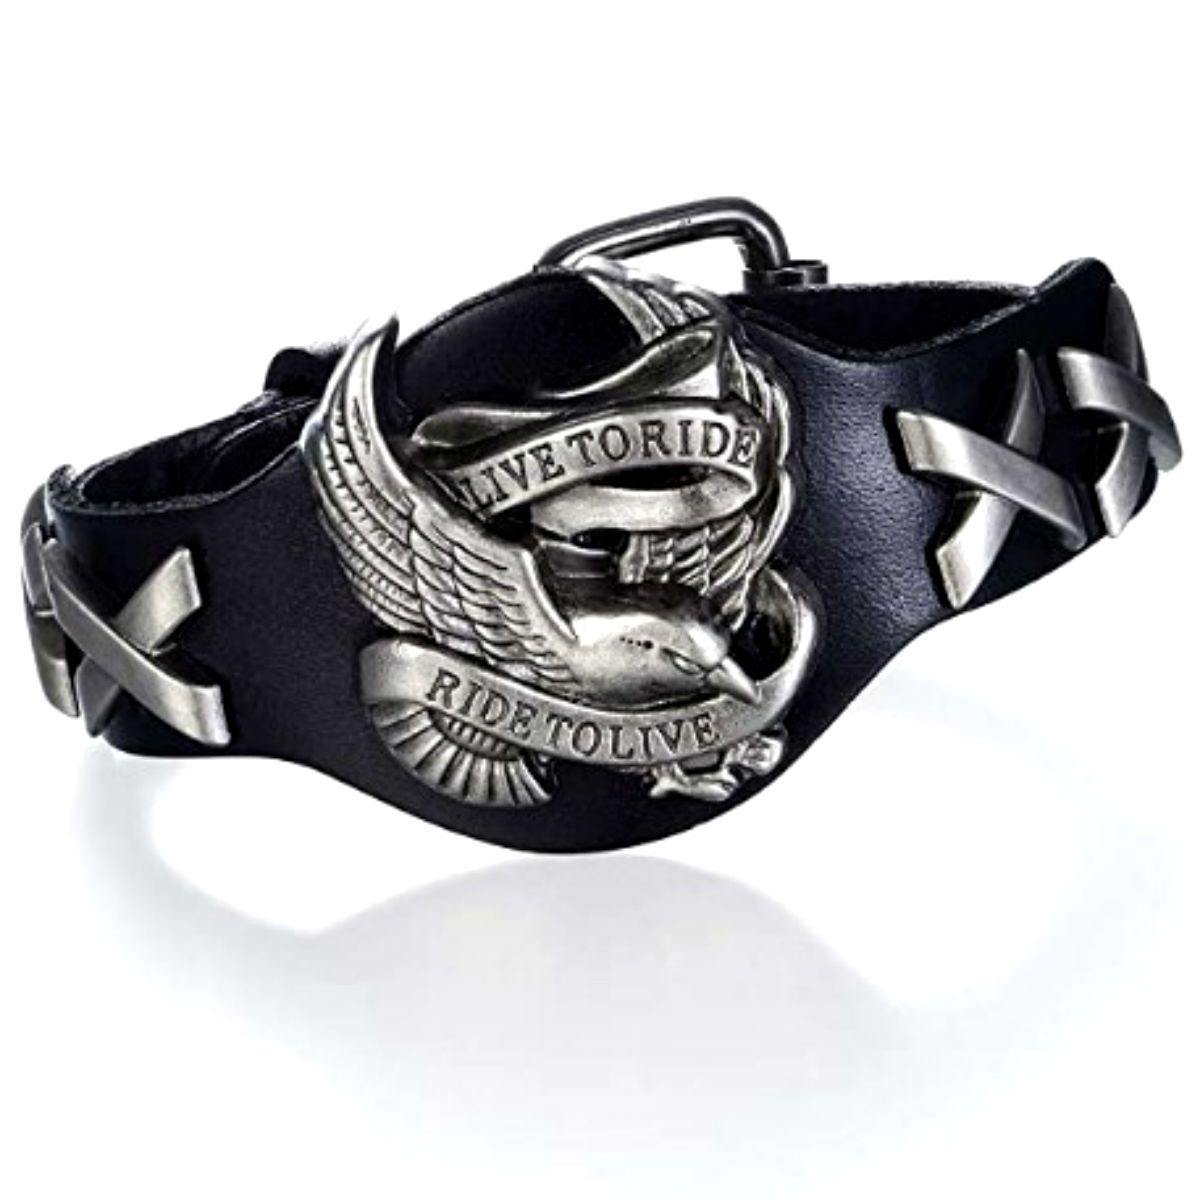 Badass Live To Ride Biker Leather Bracelet with FREE Skull Band Ring Bundle - American Legend Rider